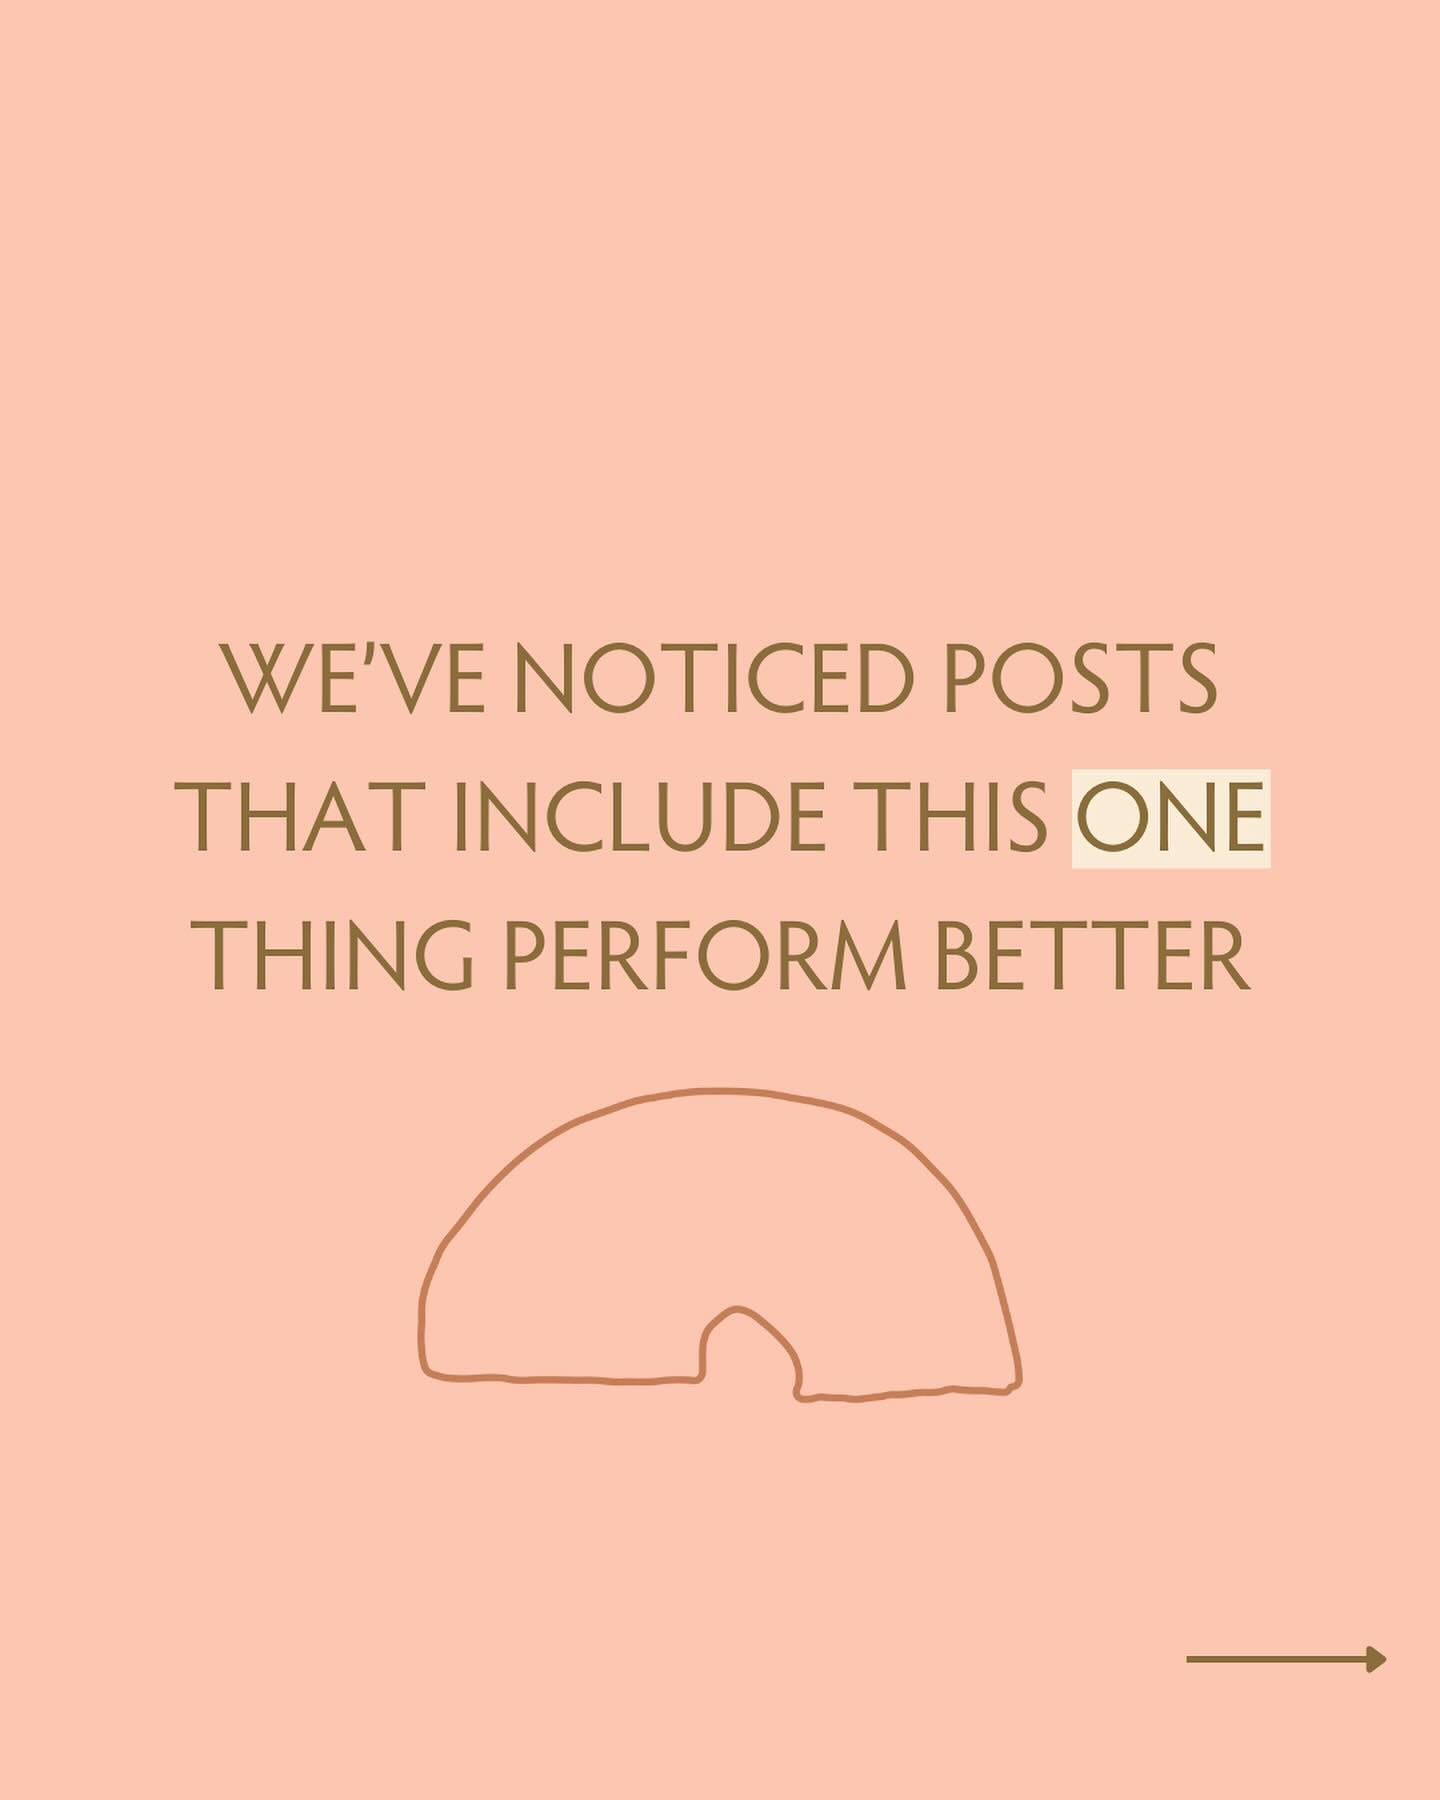 Believe it or not, including this ONE thing in your content will likely make it perform better. 👇

Share slightly controversial topics or encourage your audience to give their opinions. 

People LOVE sharing their thoughts. So use this to your advan